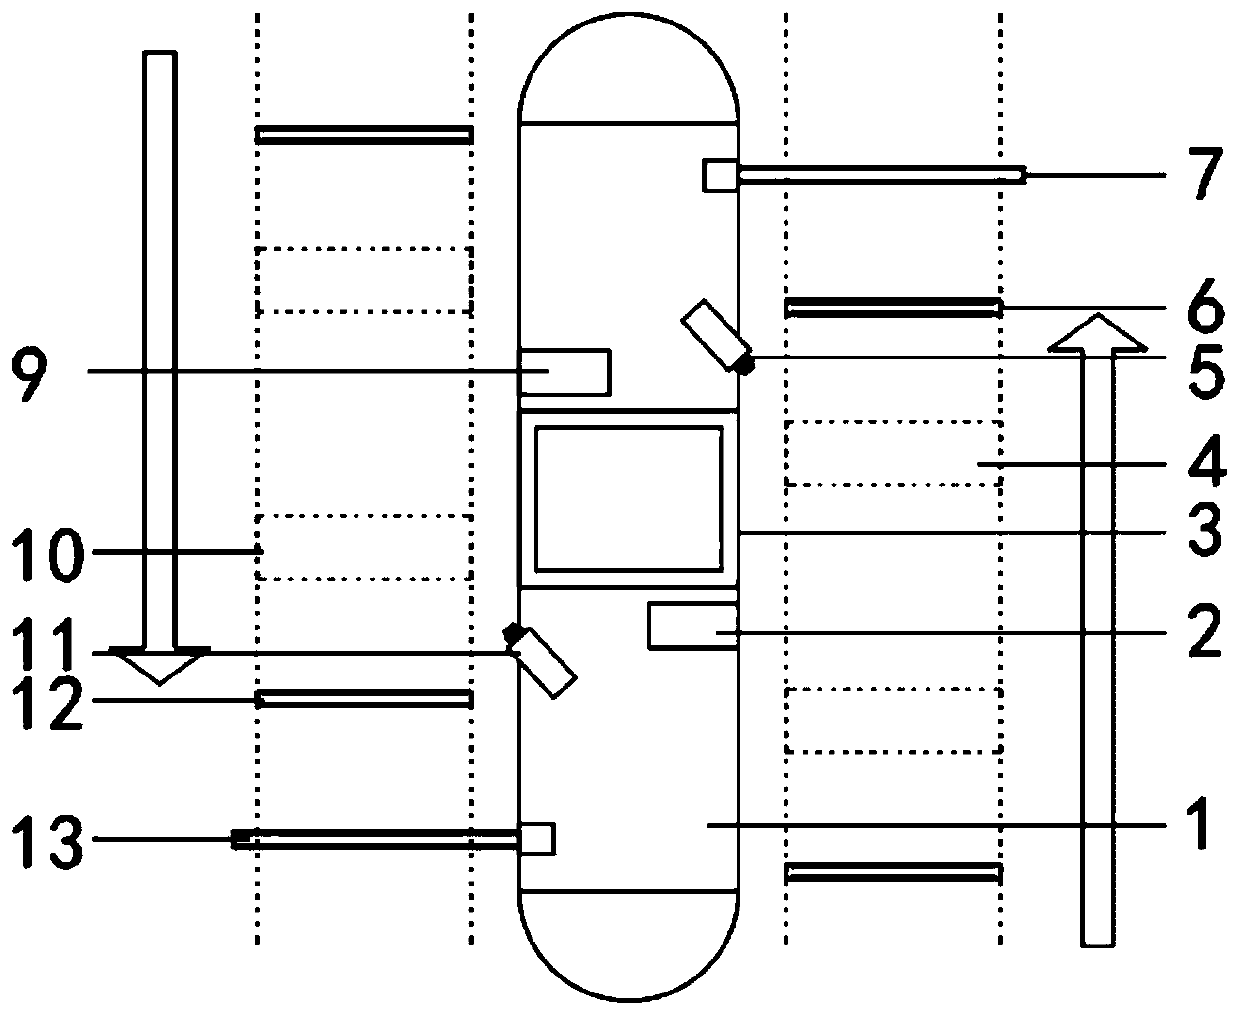 A barrier gate mounting system with an anti-collision function